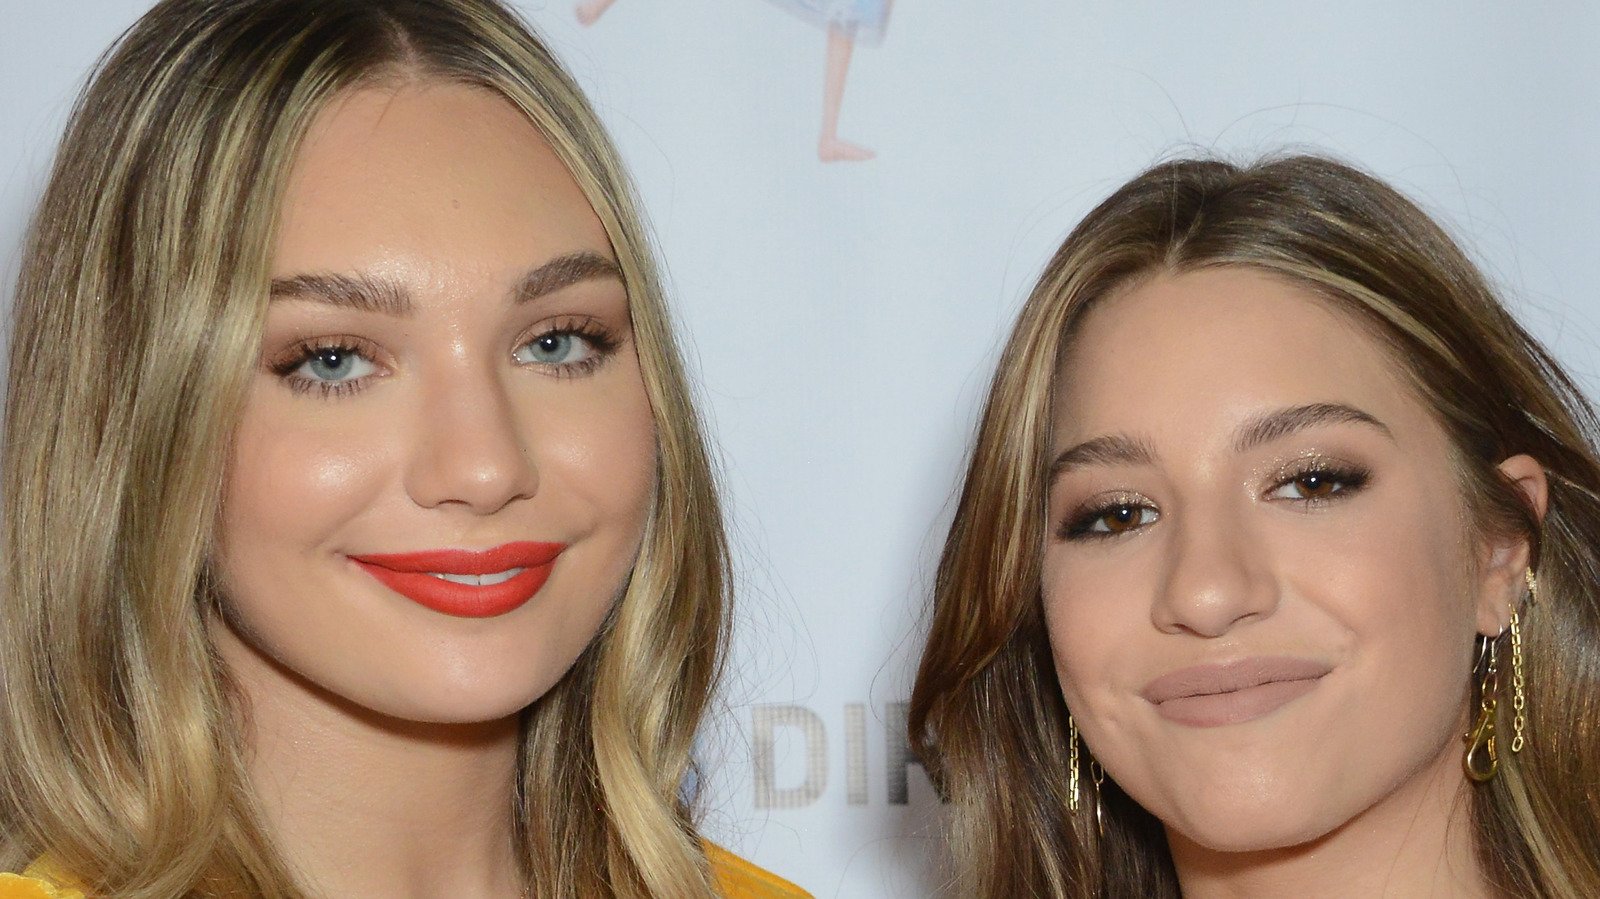 What Are Mackenzie And Maddie Ziegler From Dance Moms Doing Now? - The List